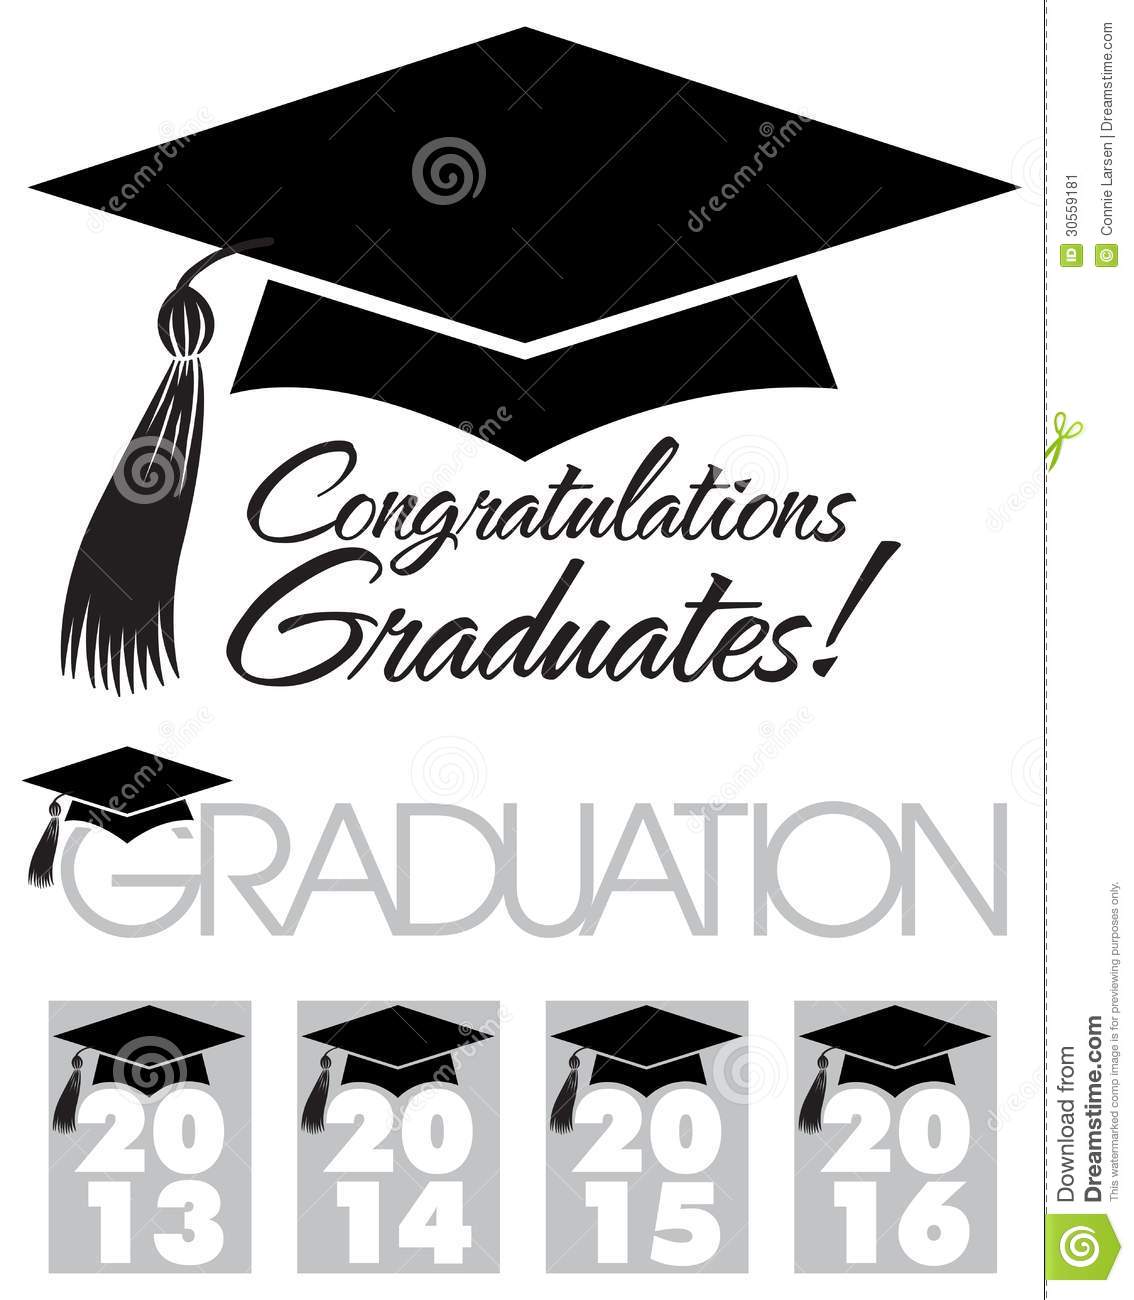 Graduation And Graphics For The Years 2013 2014 2015 And 2016